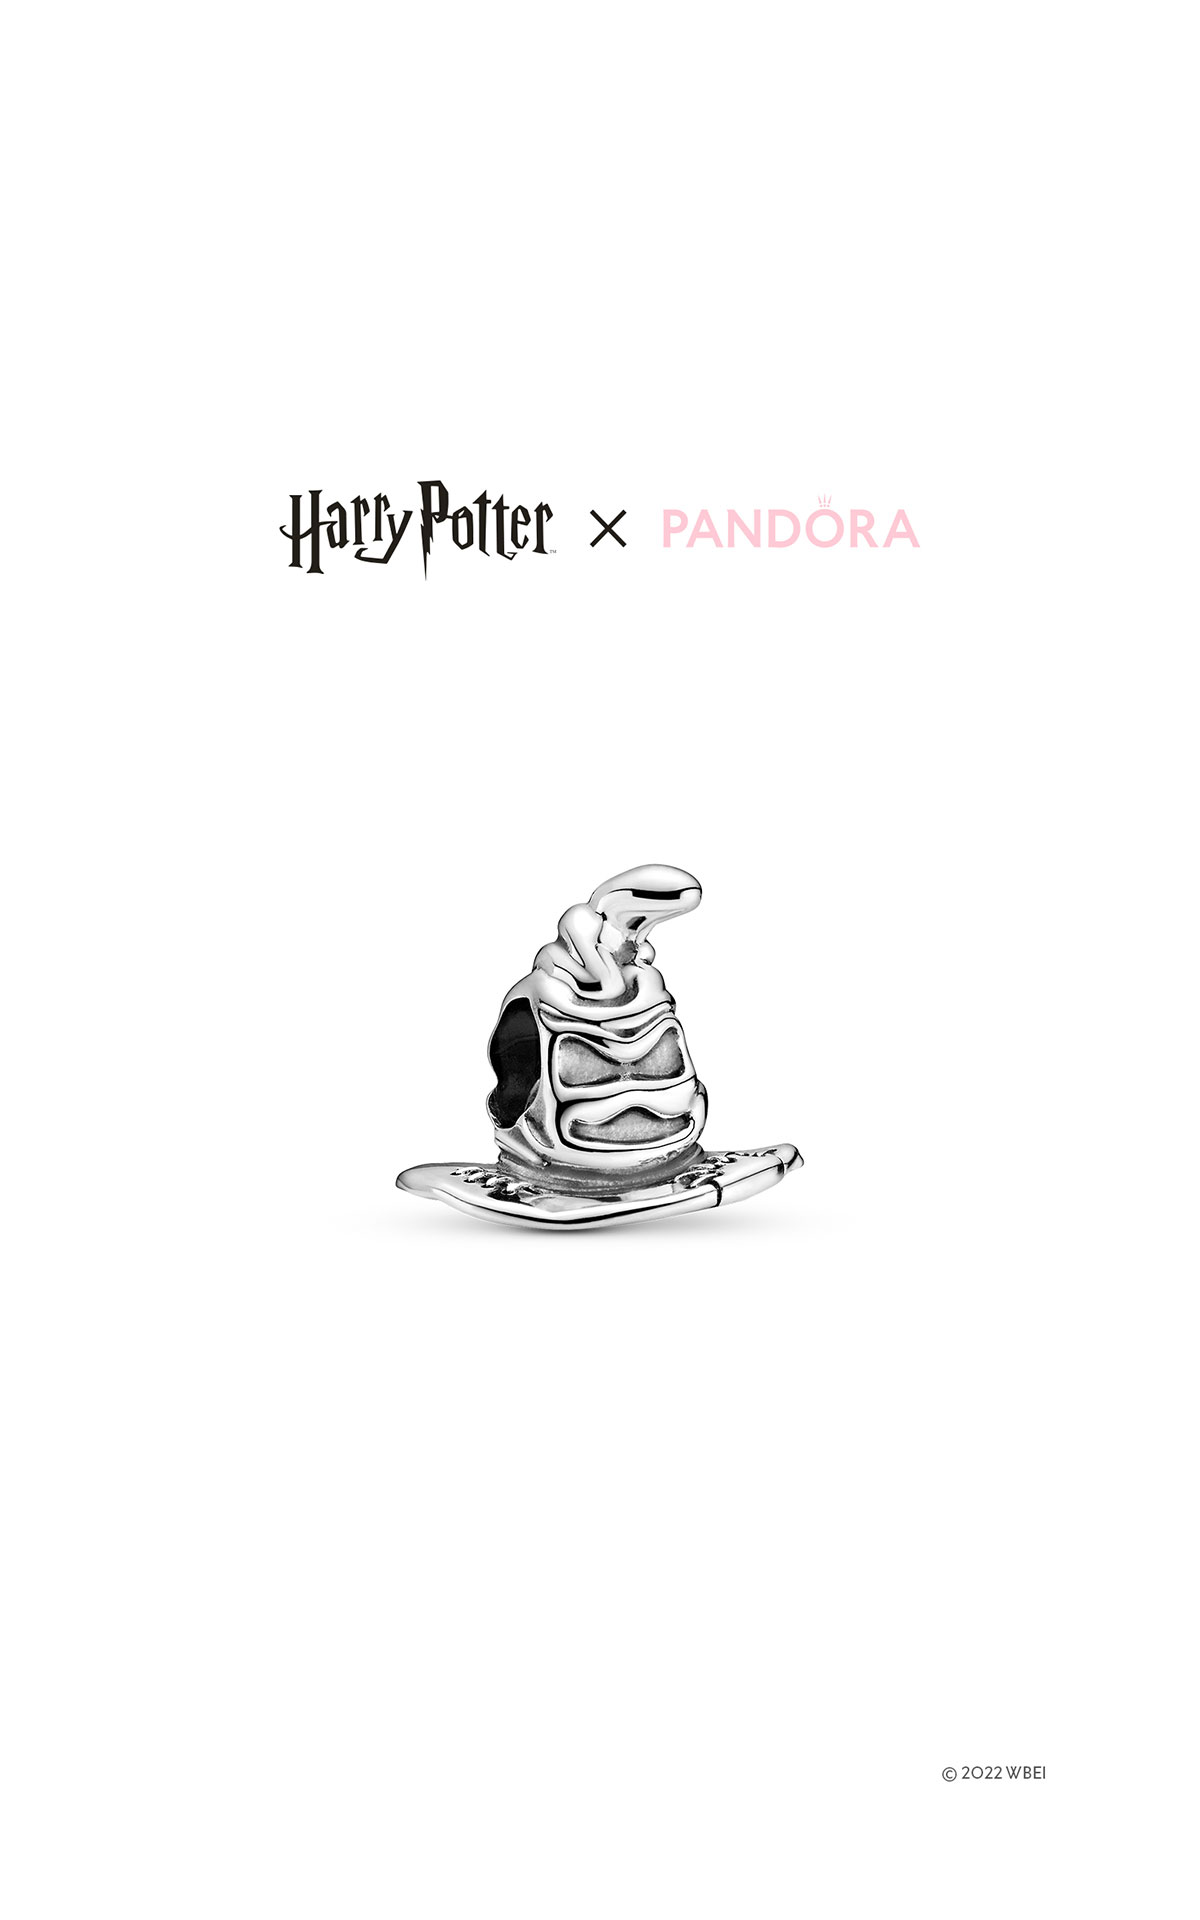 Pandora Harry Potter sorting hat from Bicester Village